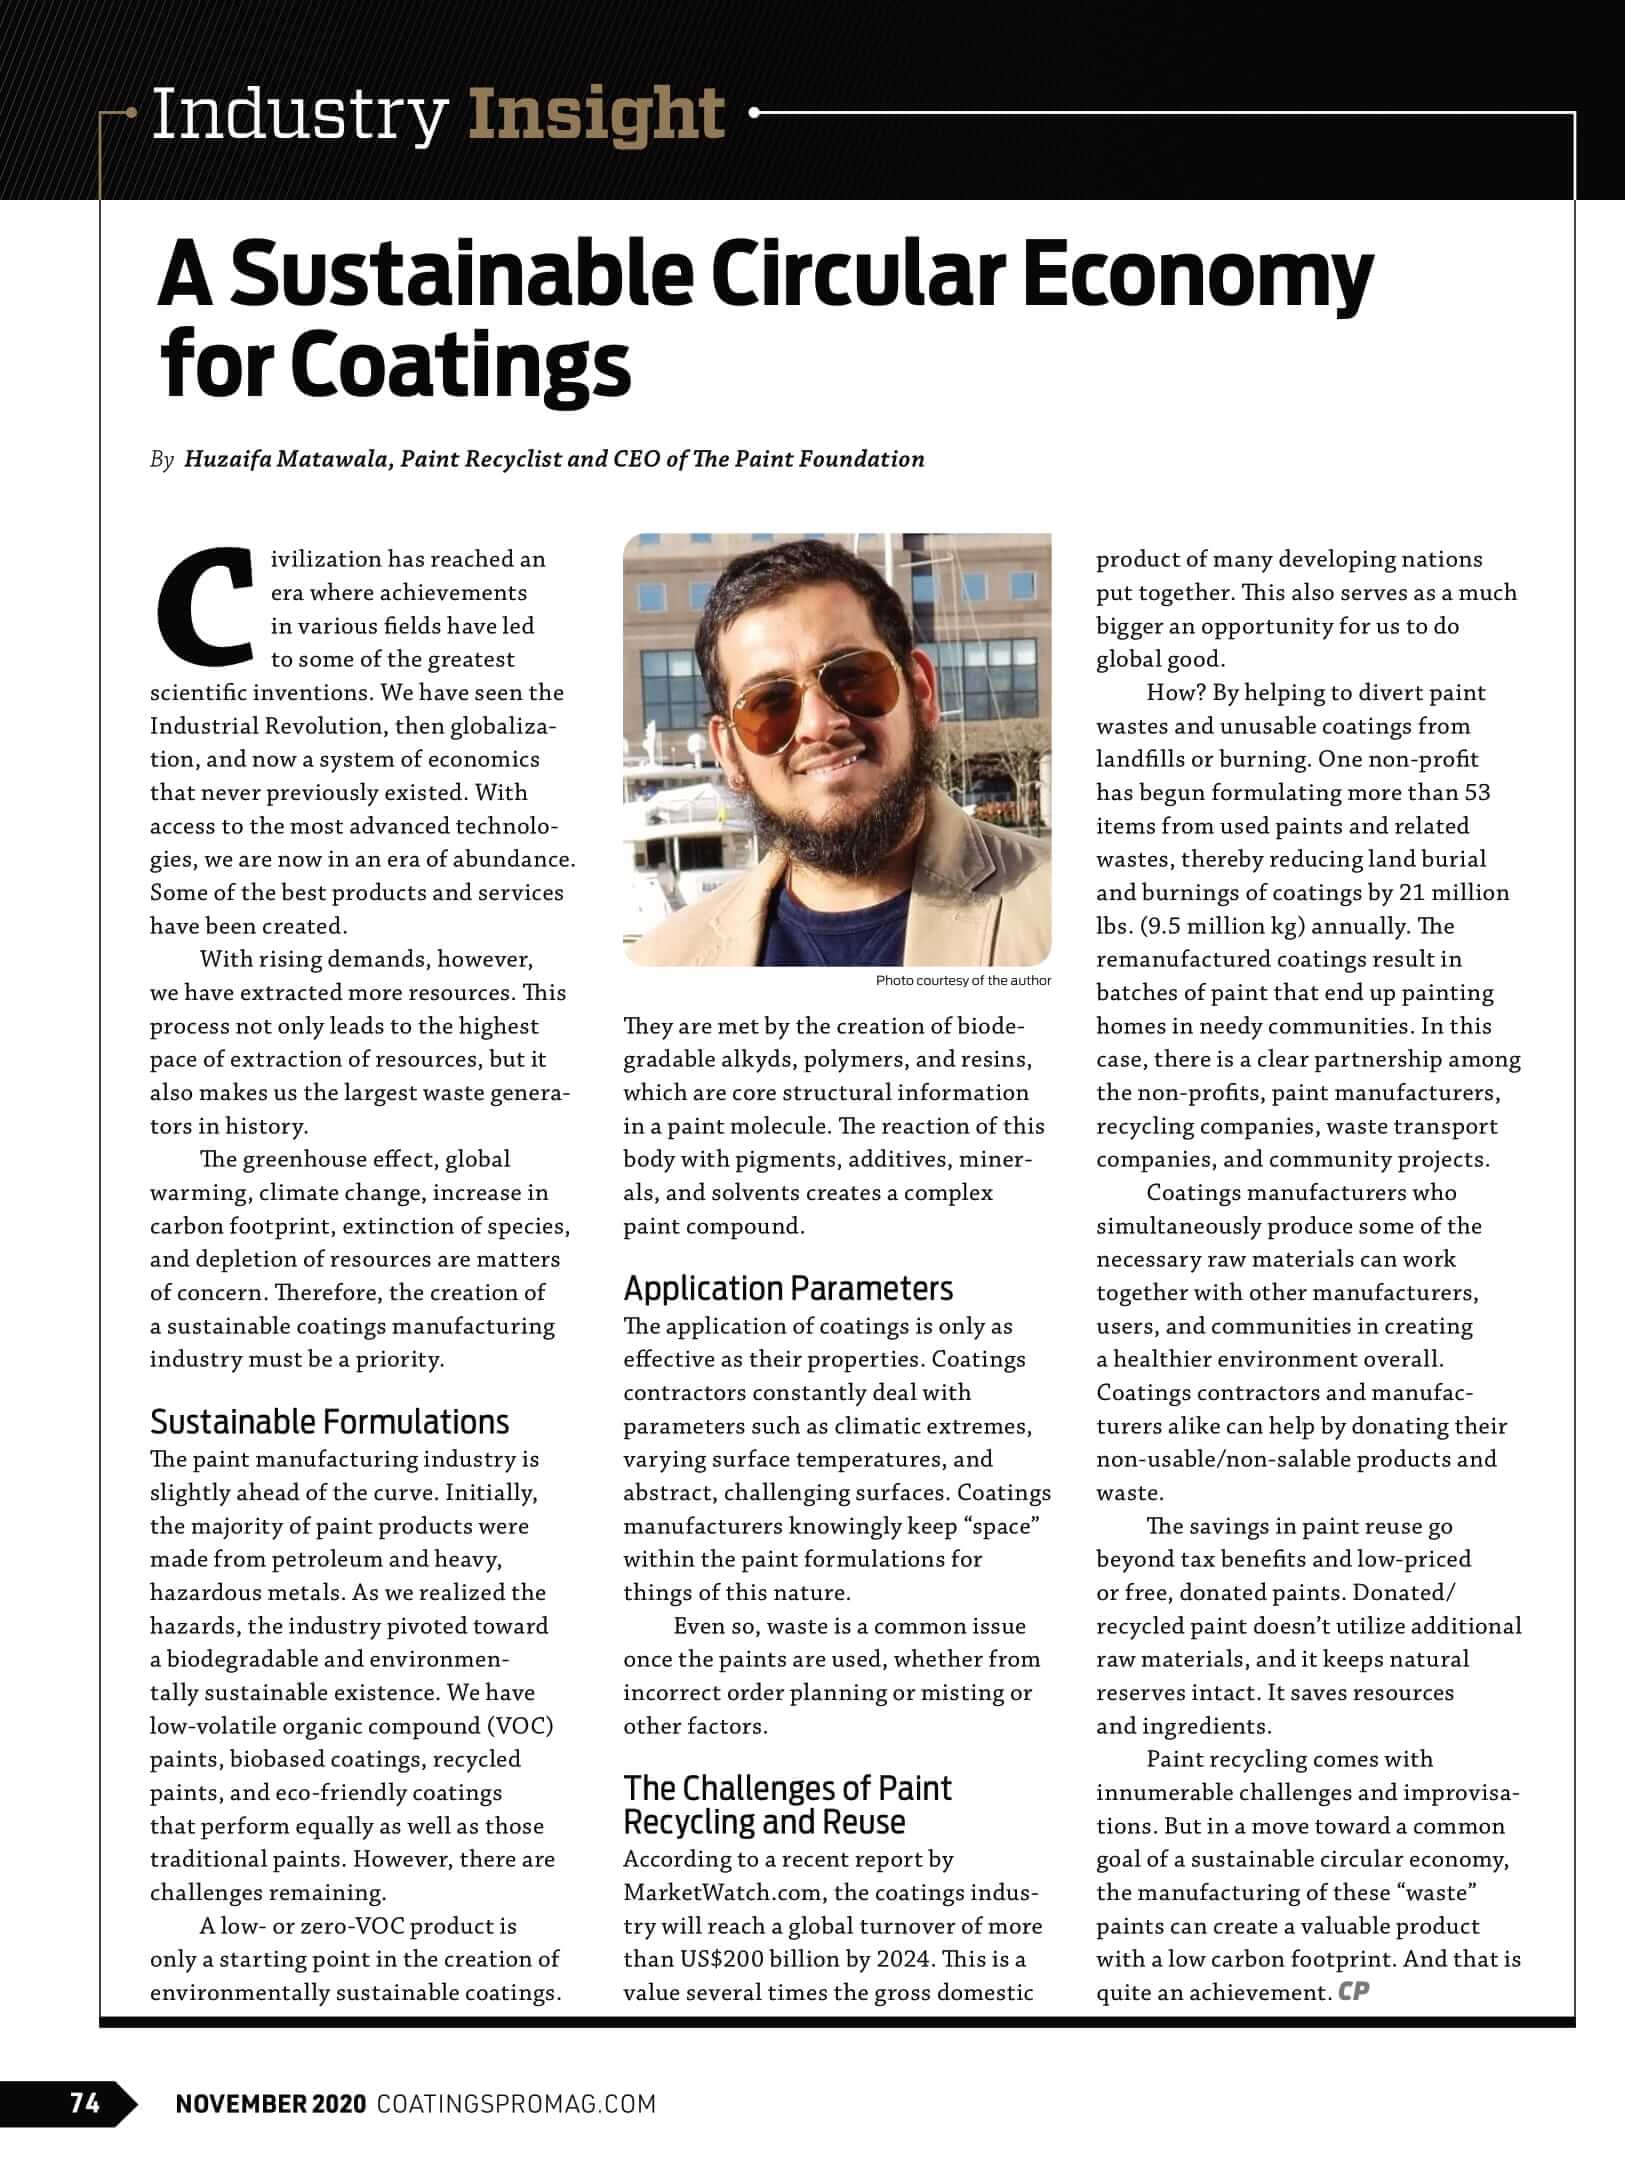 A Sustainable Circular Economy for Coatings